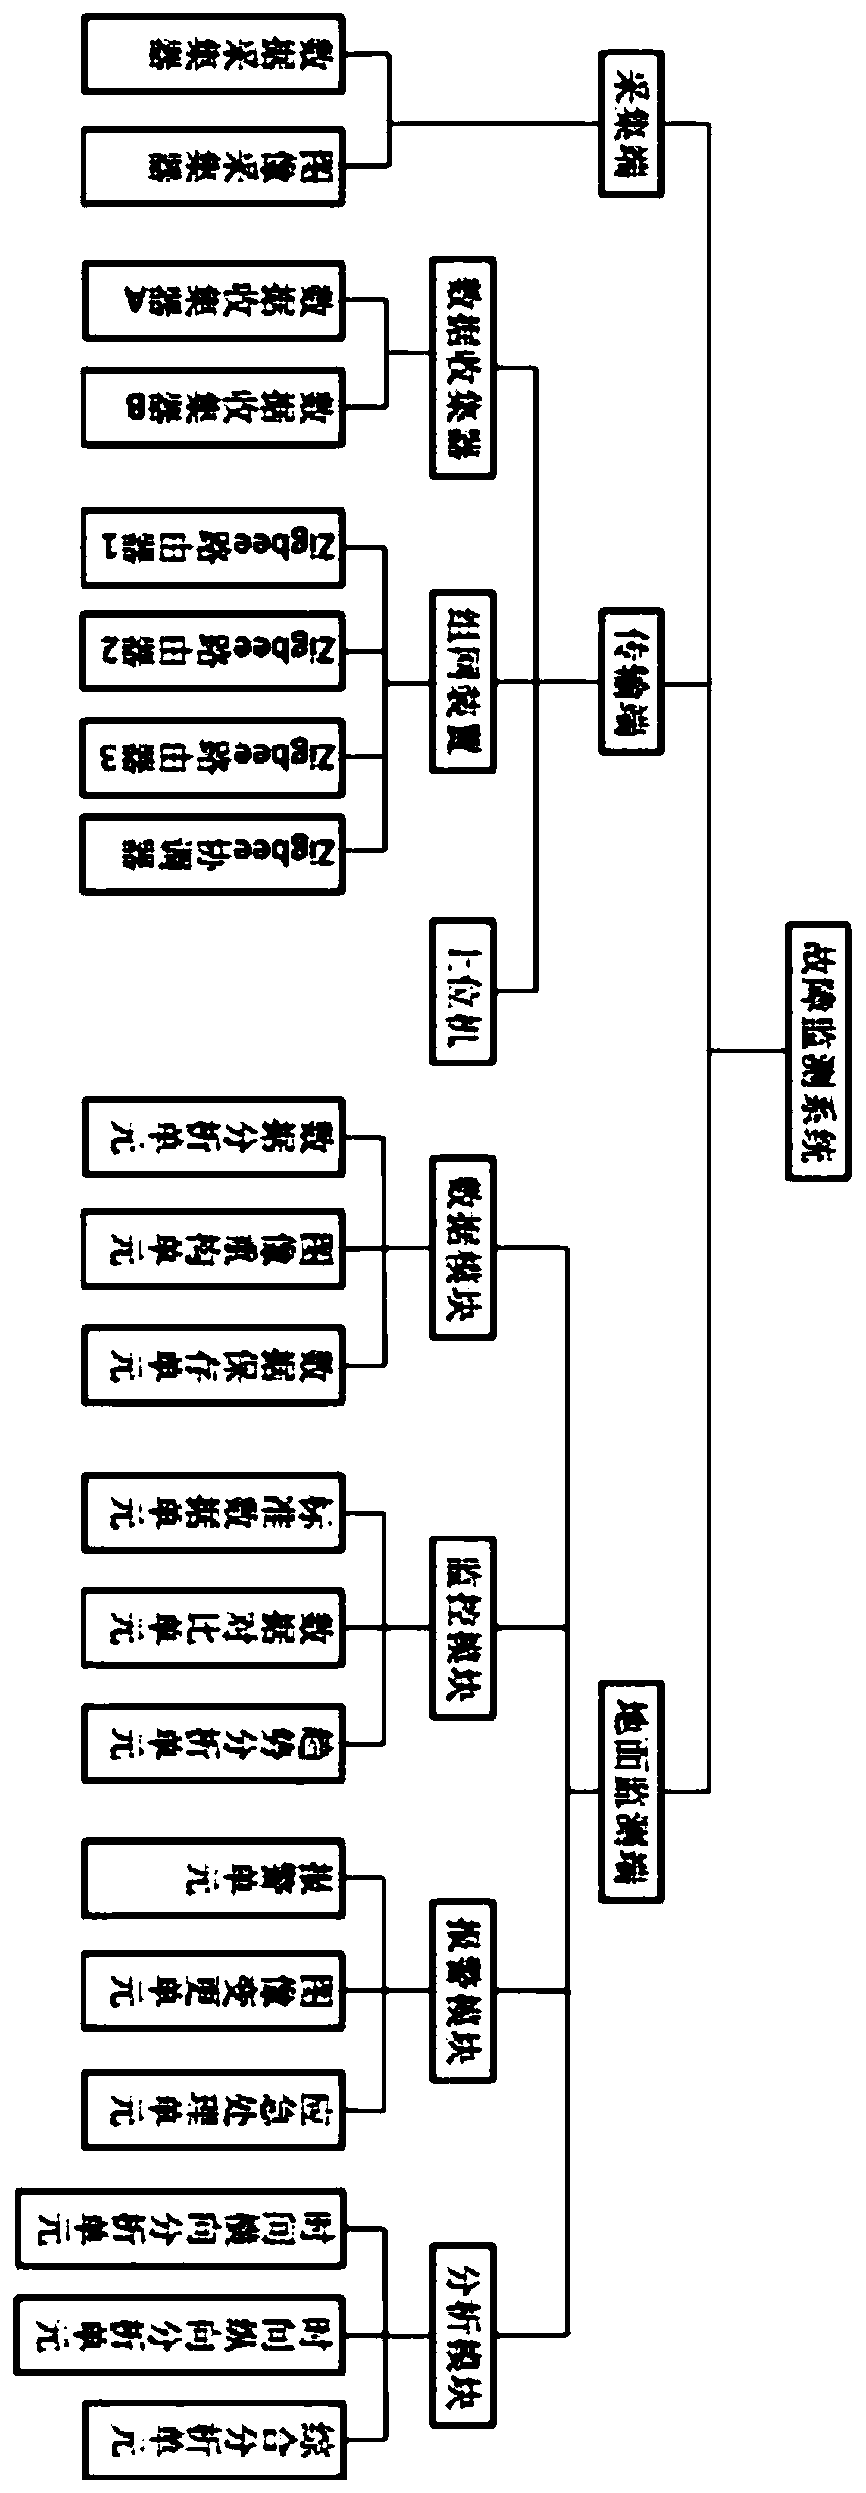 Fault monitoring system for mine shaft and method